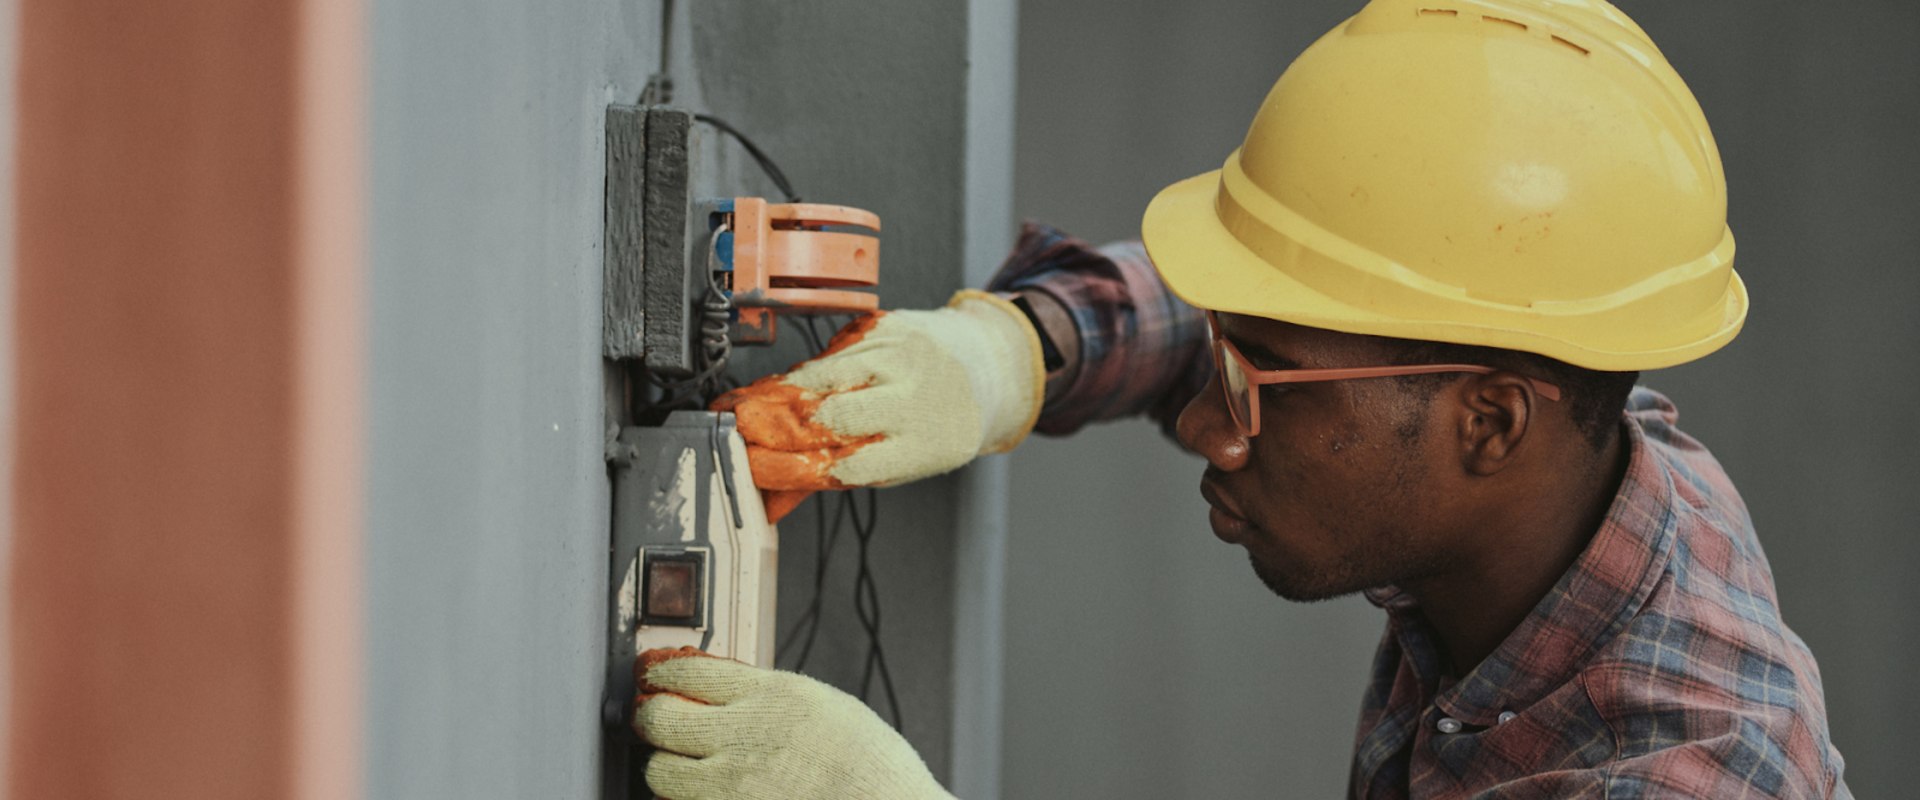 What Qualities and Skills Do You Need to Become an Electrician?